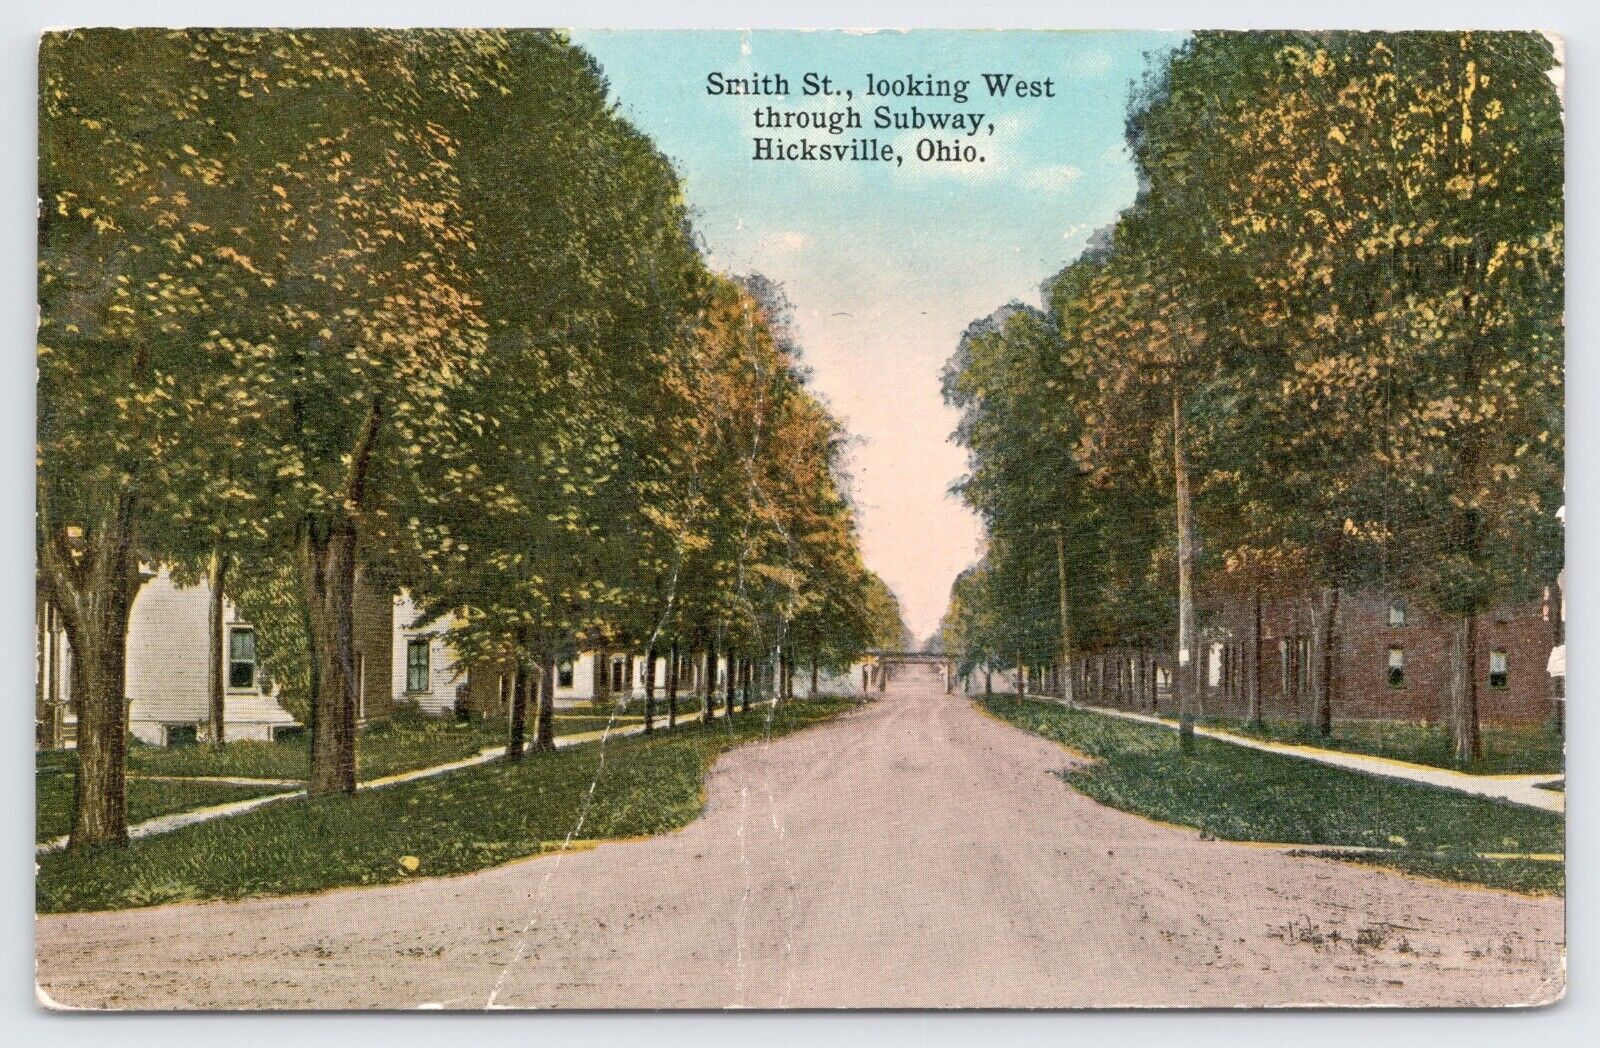 c1910s Hicksville Ohio Smith St. Looking West Vintage Defiance County Postcard